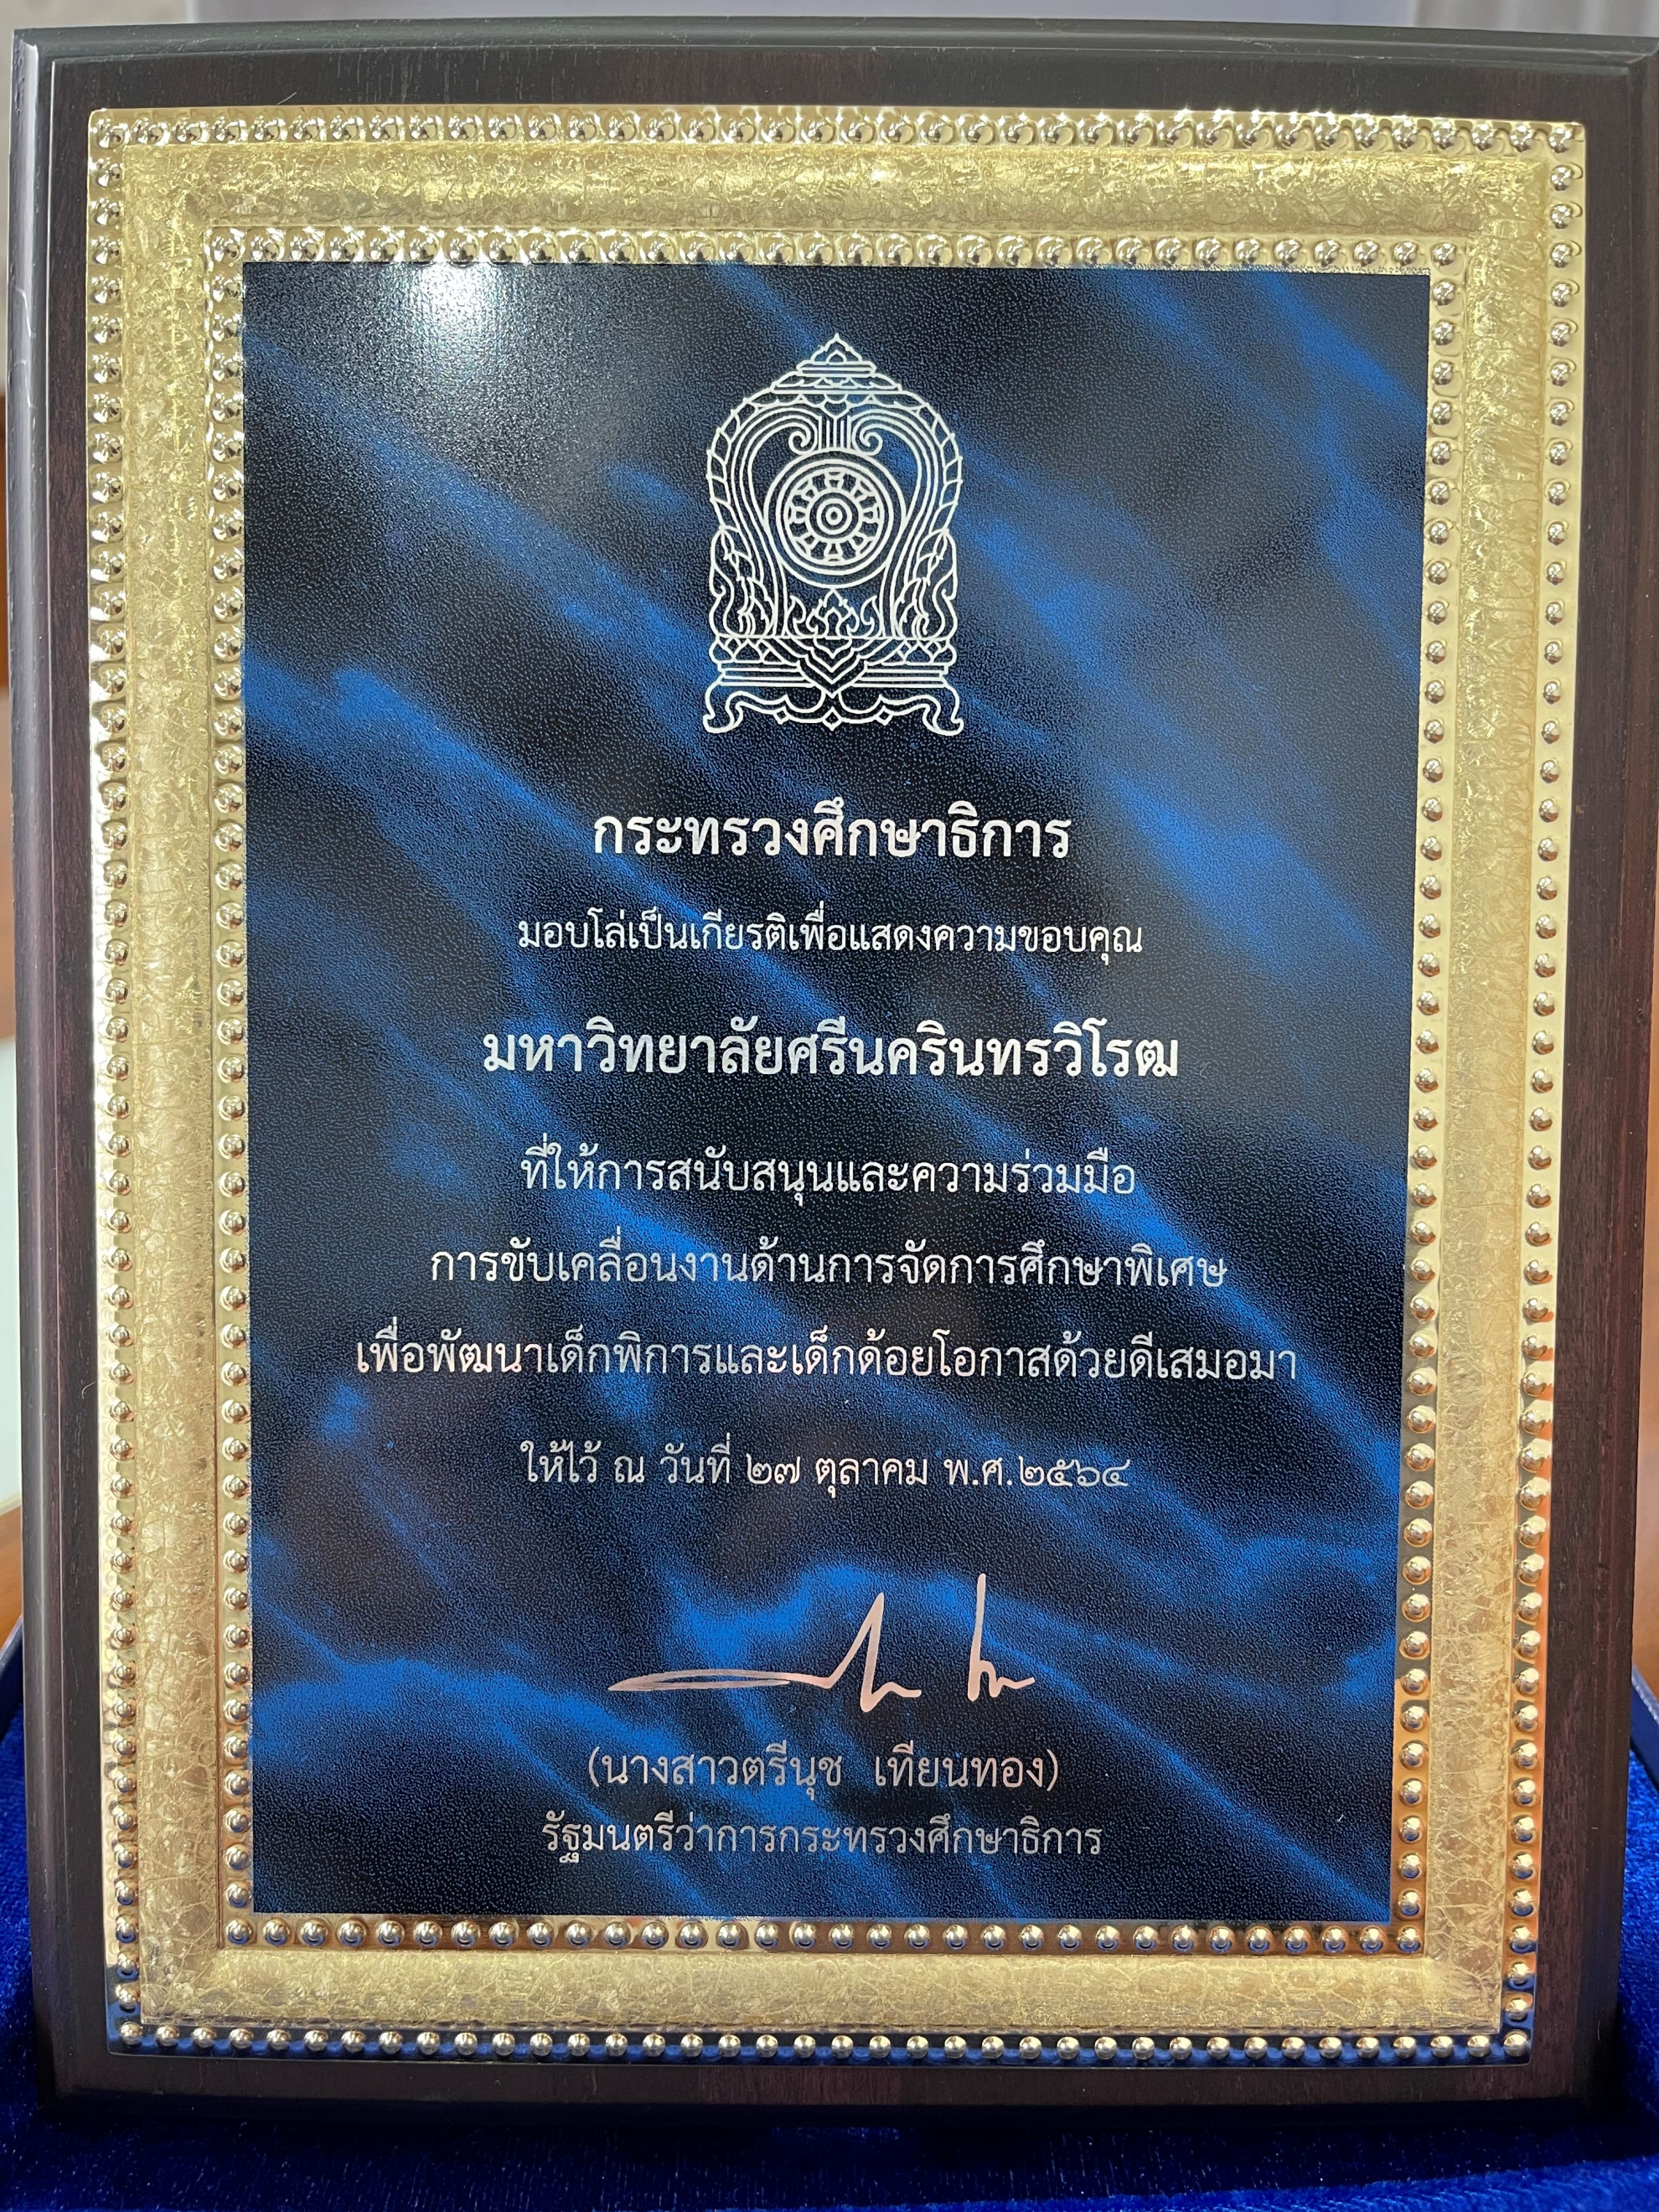 Award of Appreciation from the Ministry of Education